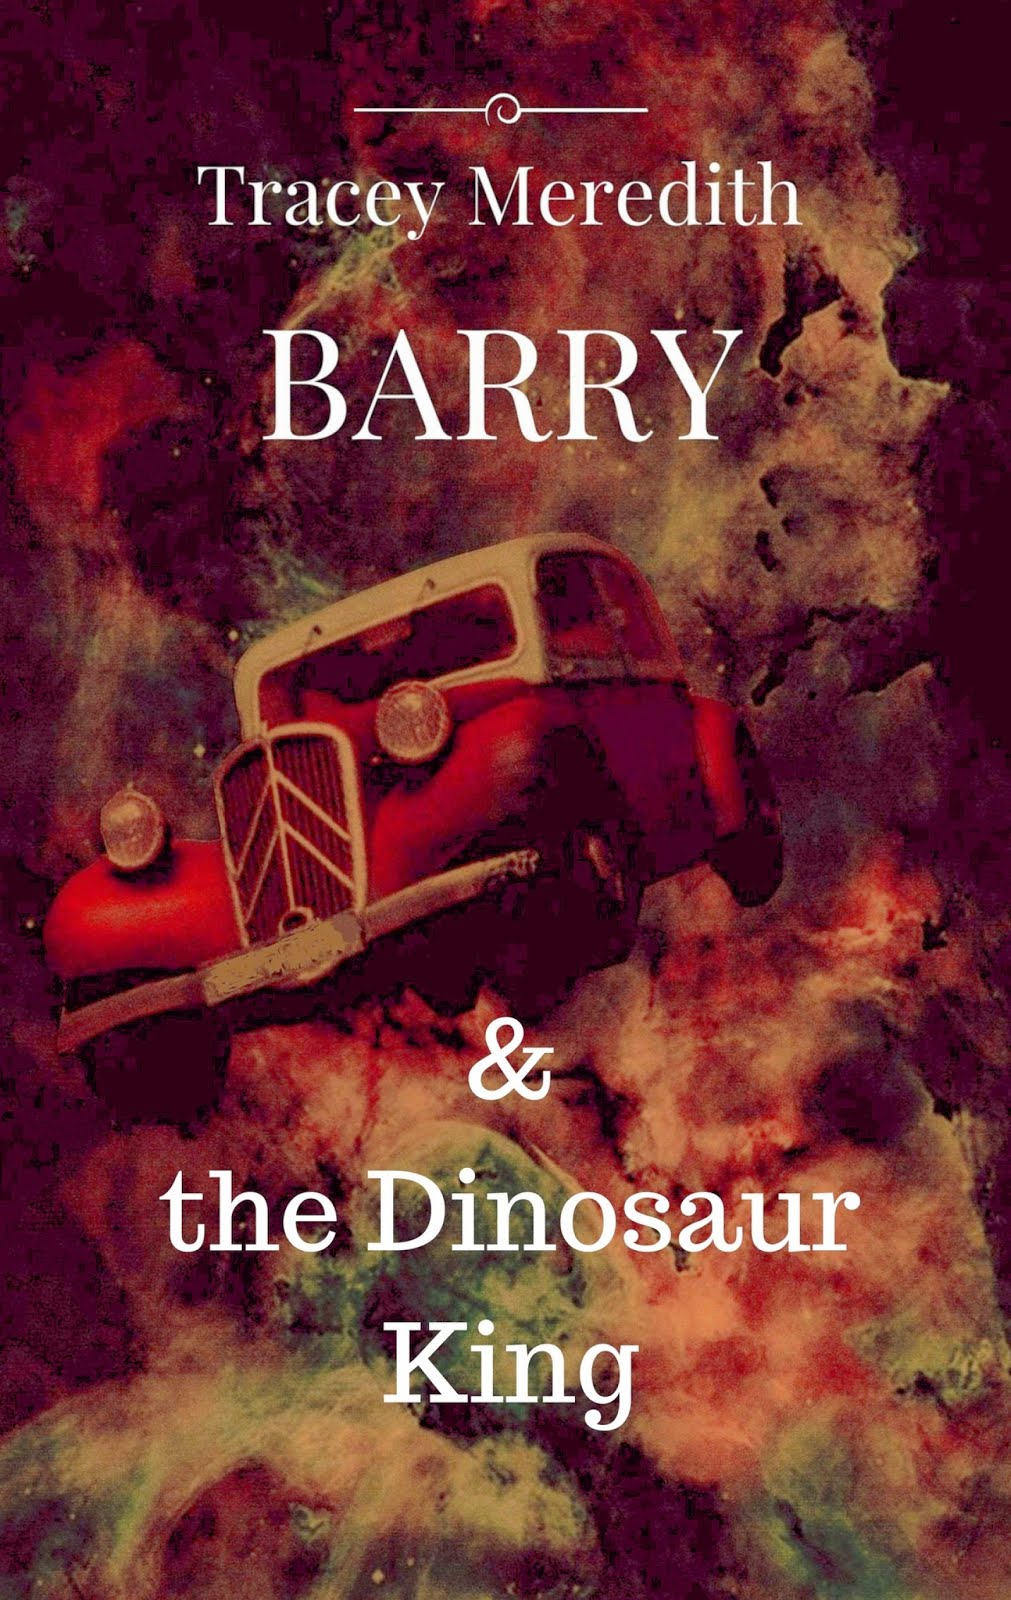 Barry and the Dinosaur King. Out now as ebook and paperback